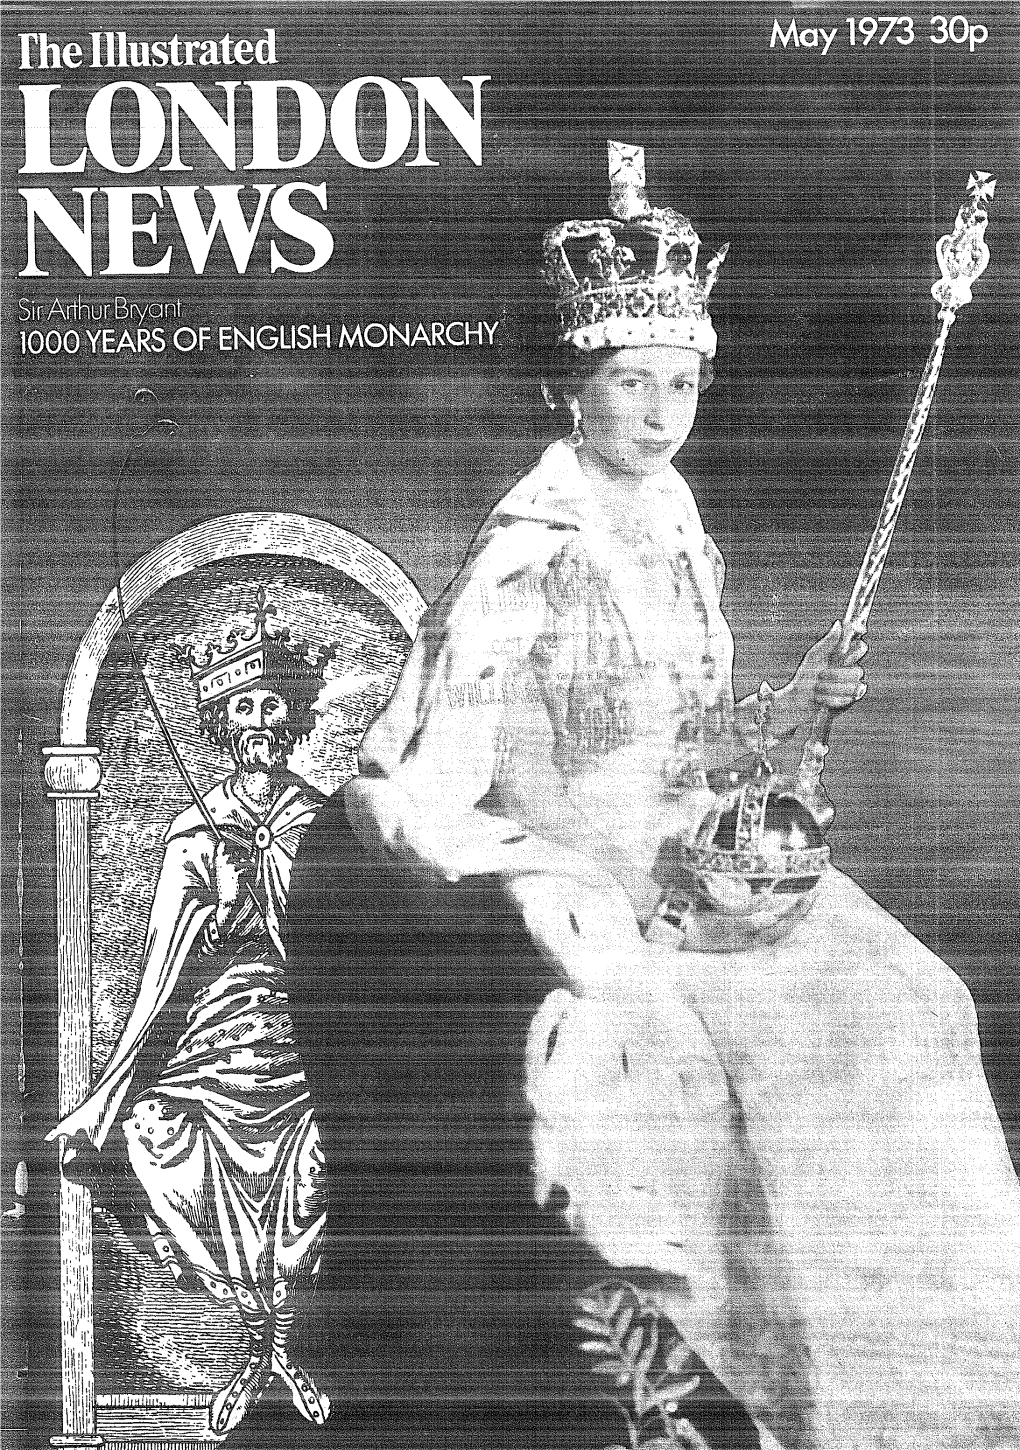 The Illustrated London News, May 1973